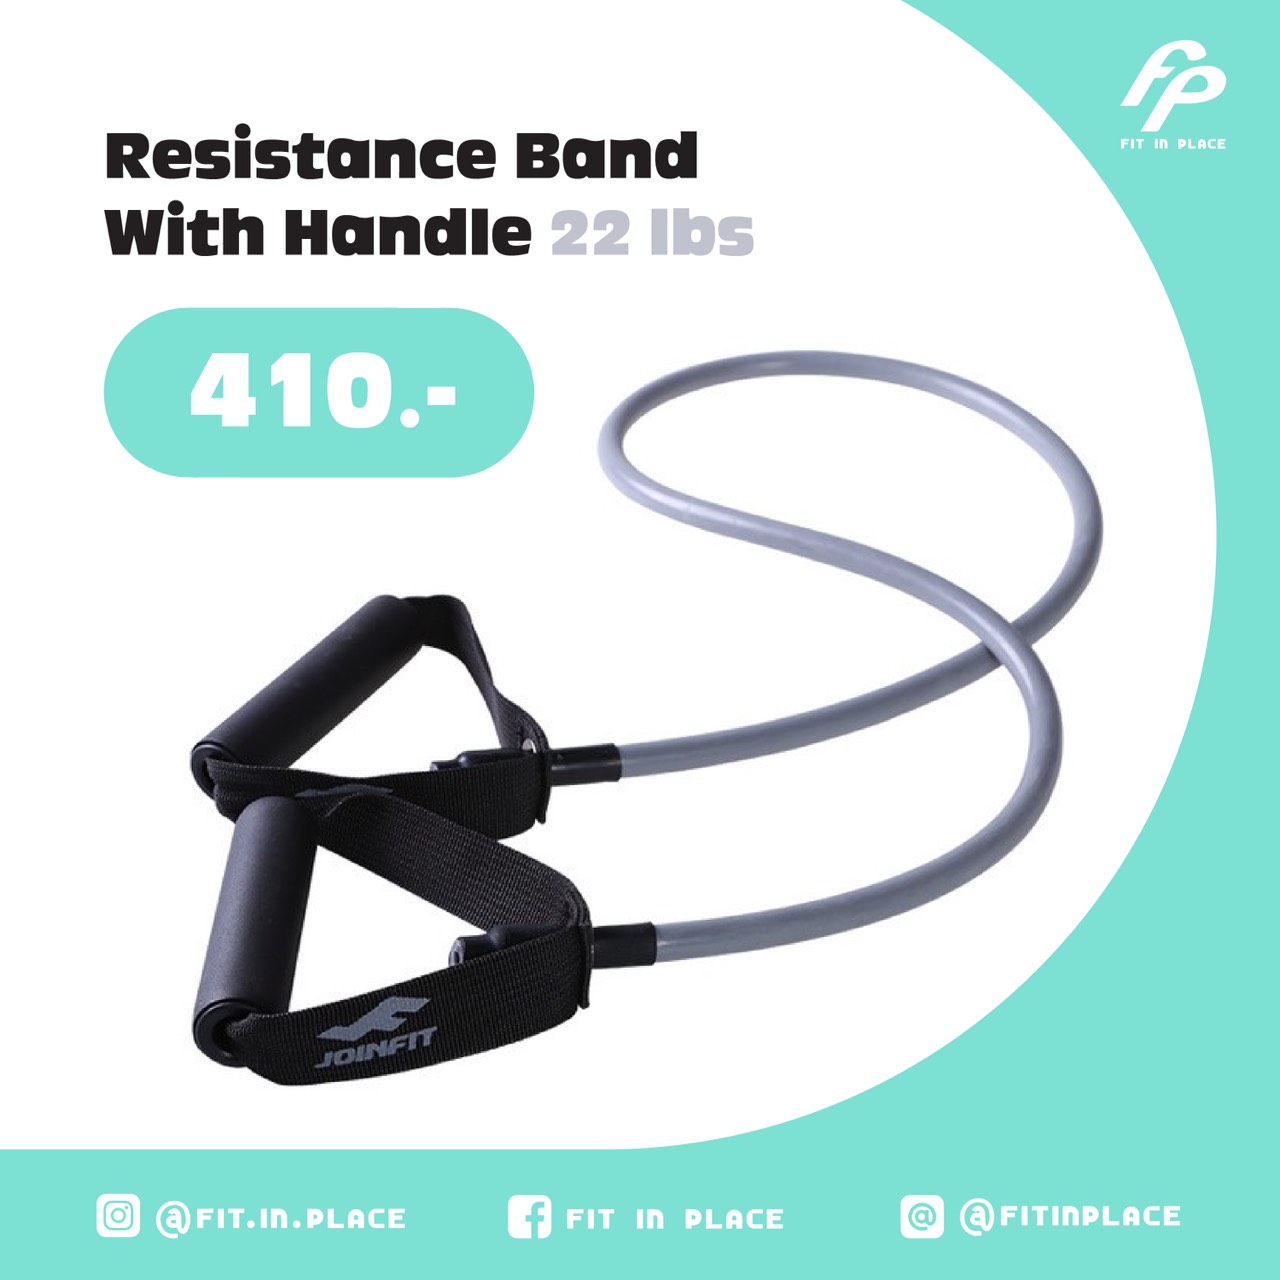 Fit in Place - Joinfit Resistance Band with Handle 22 lbs